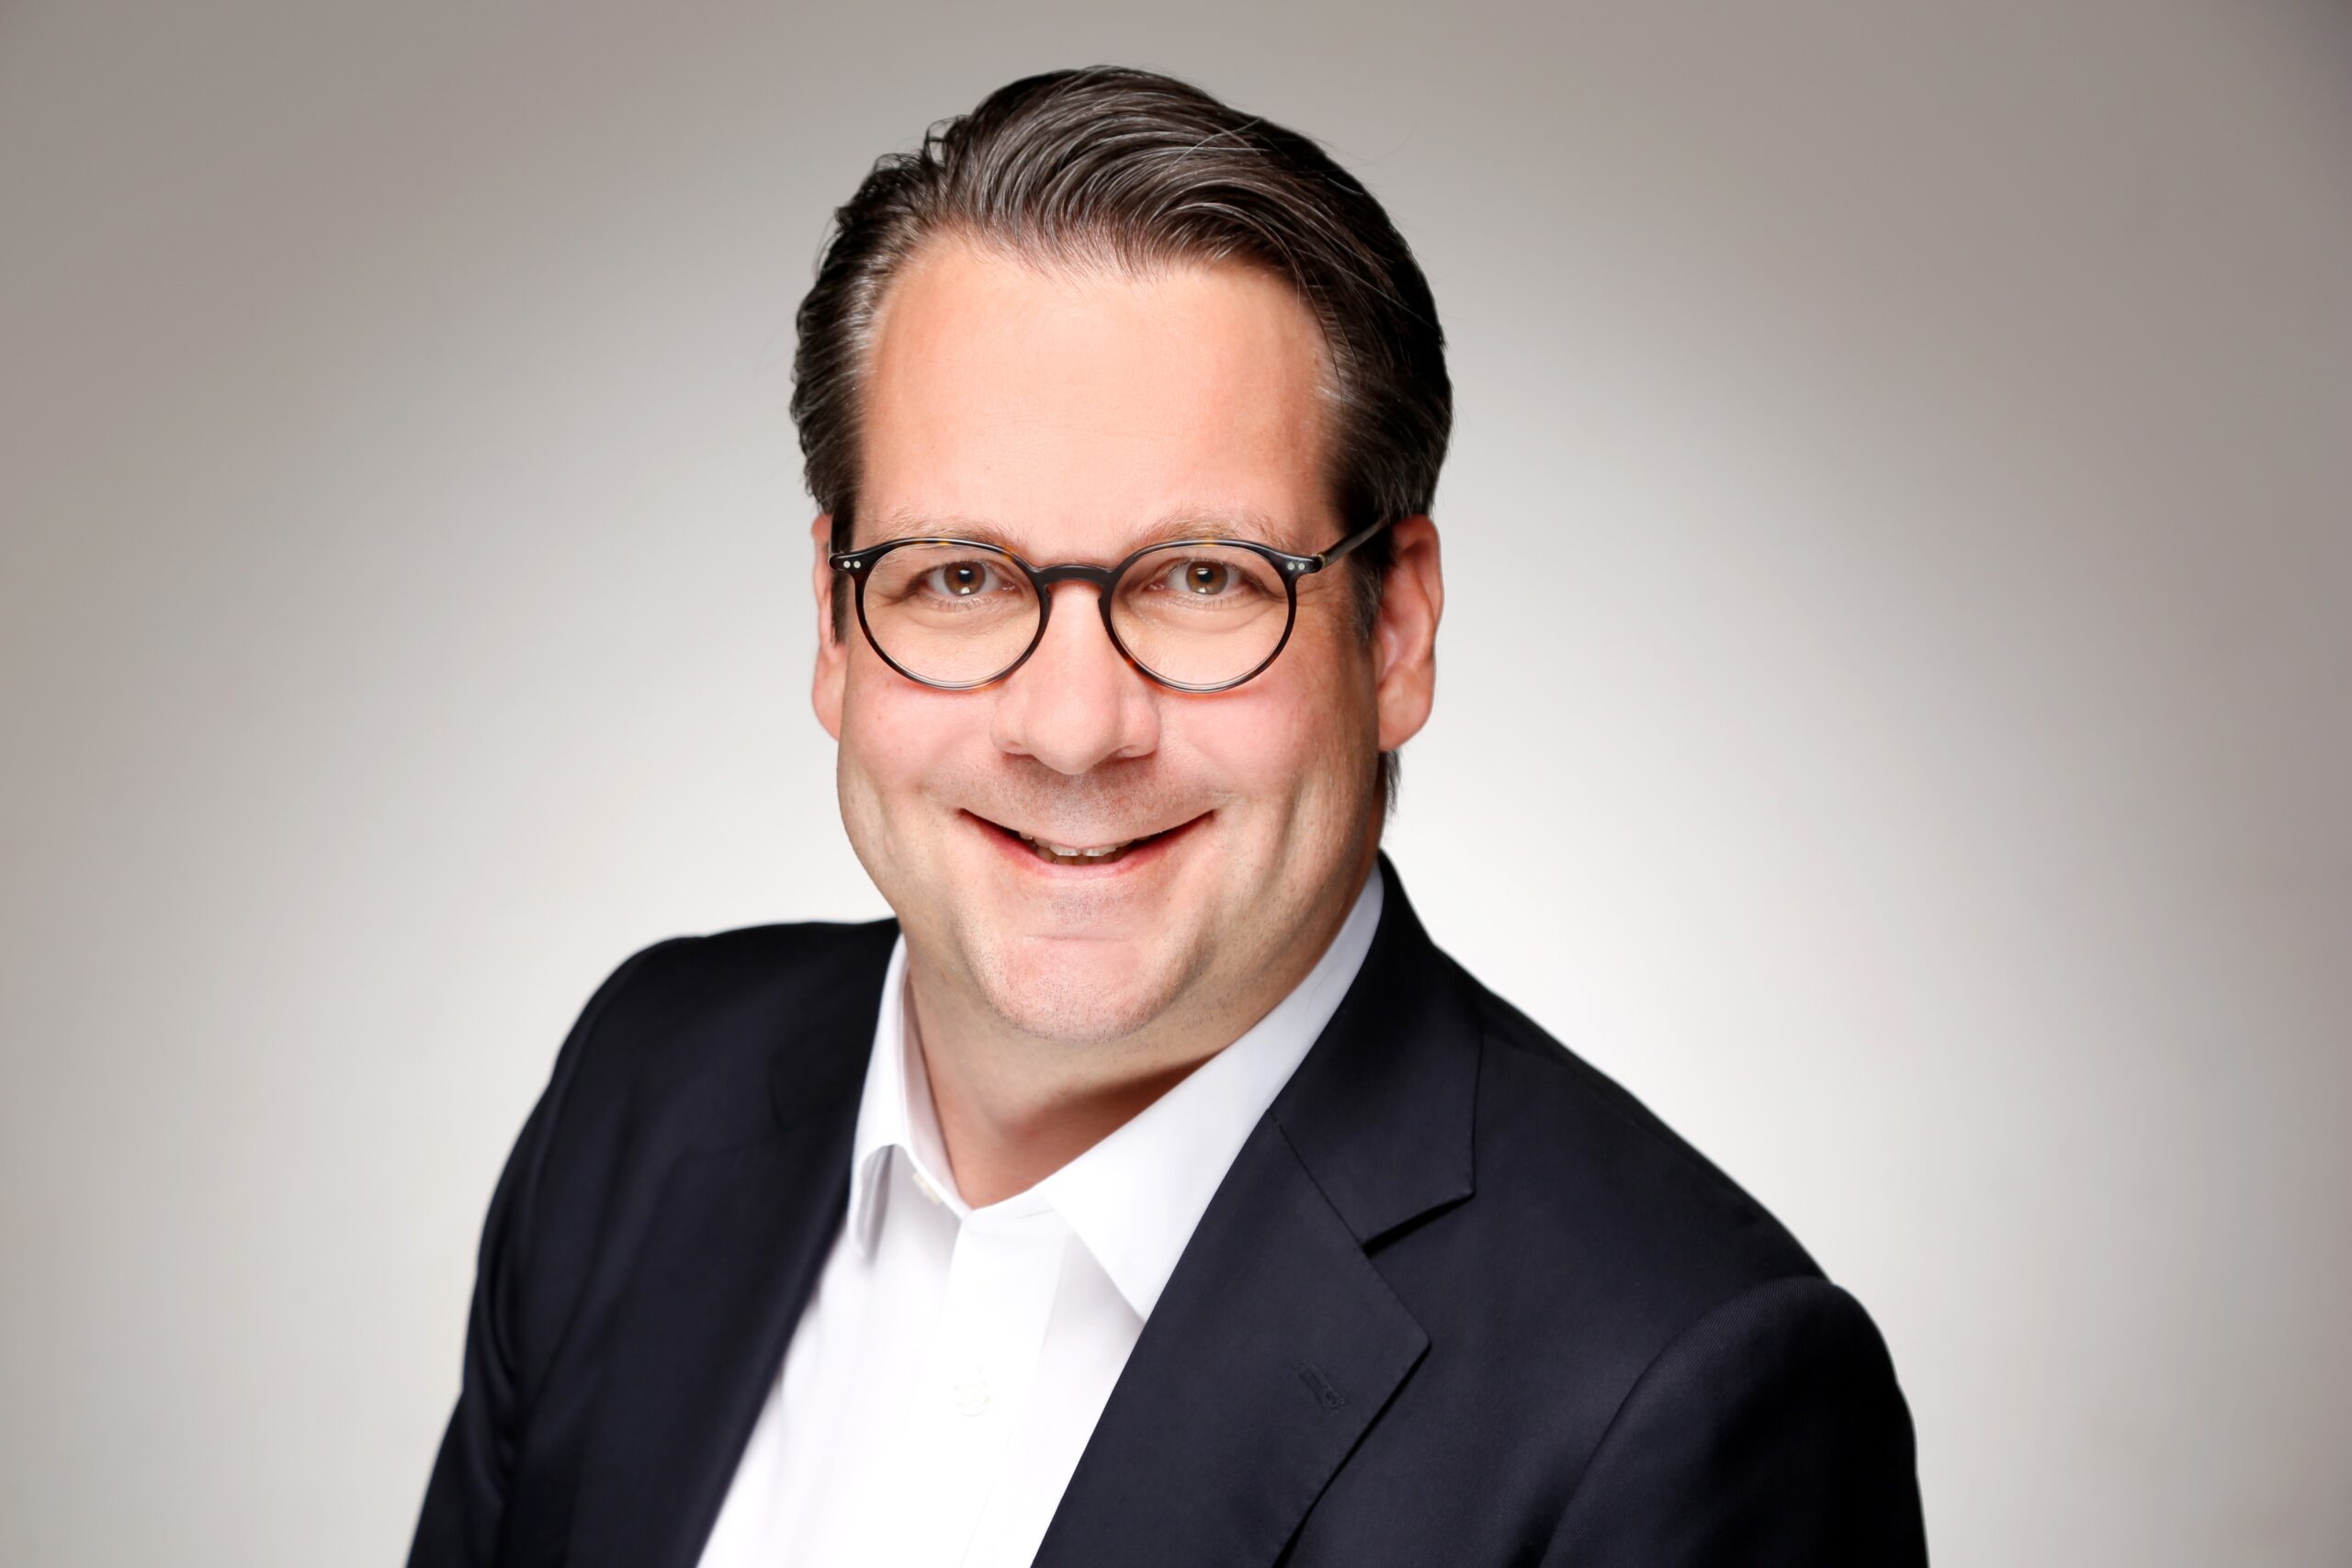 Press Release: C.O.I. Appoints Carsten Wortmann as Frankfurt-based Executive Search Business Partner